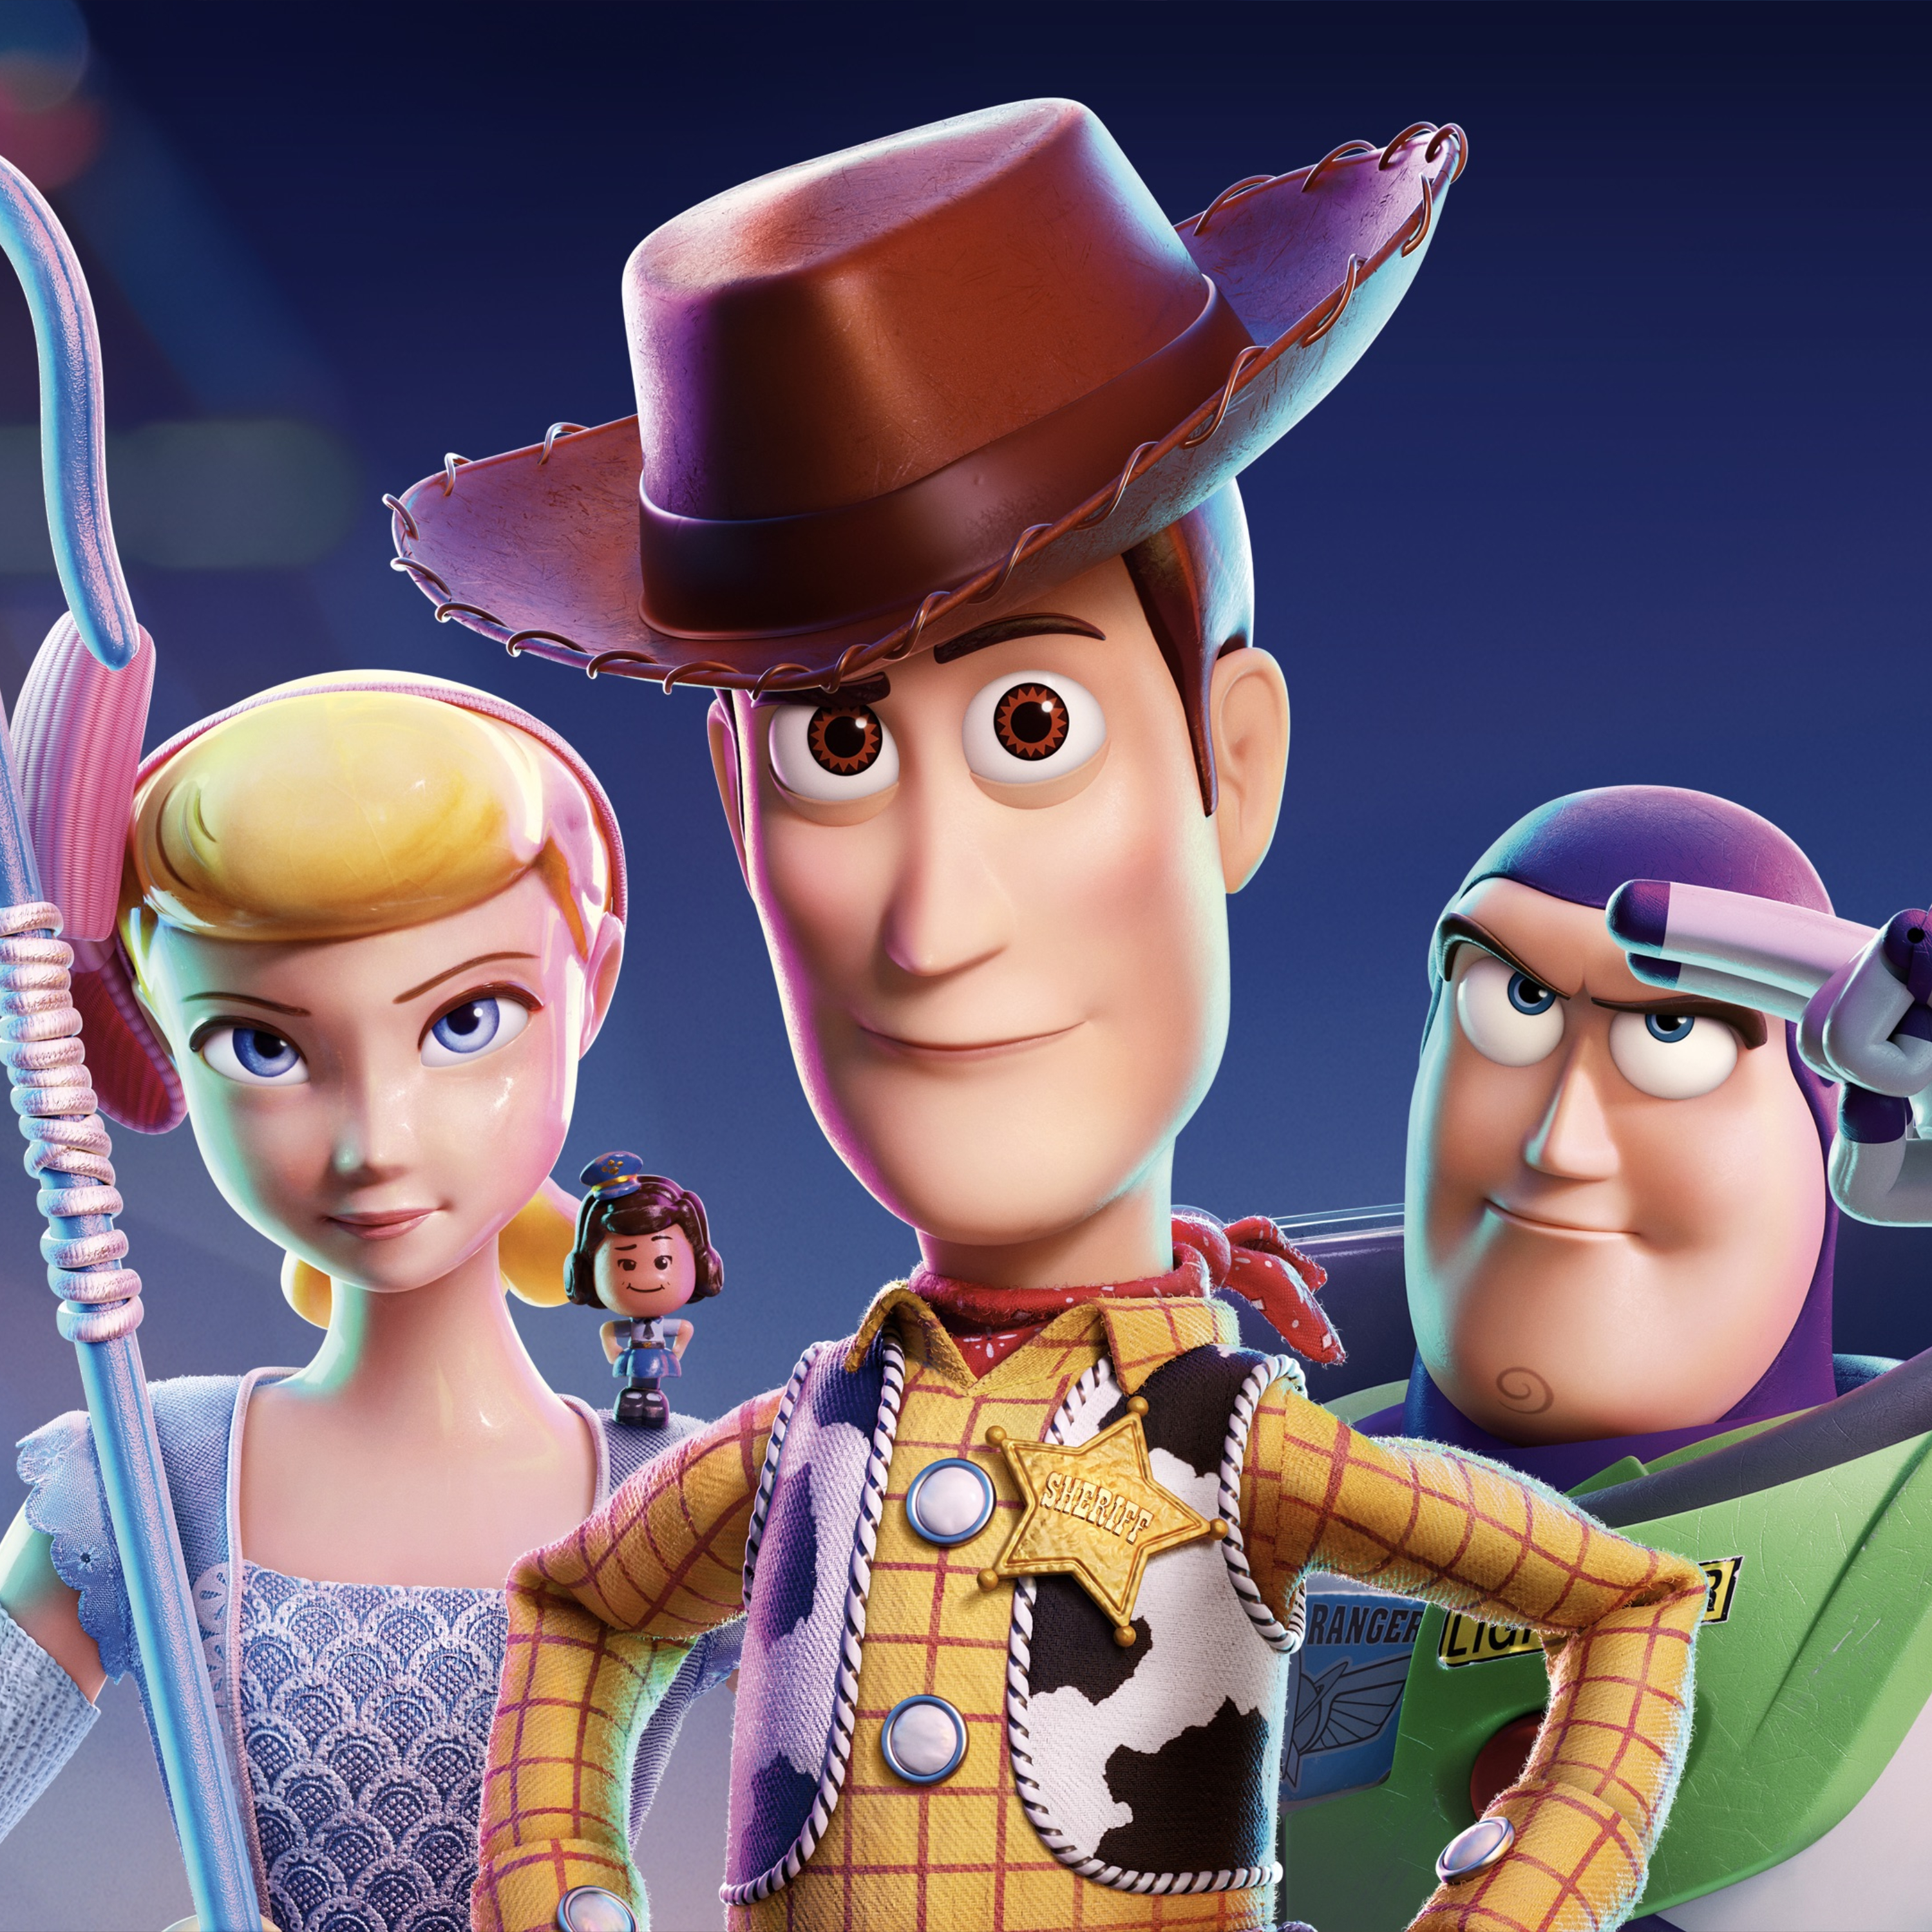 Toy story 5 by waltpeter20 on DeviantArt